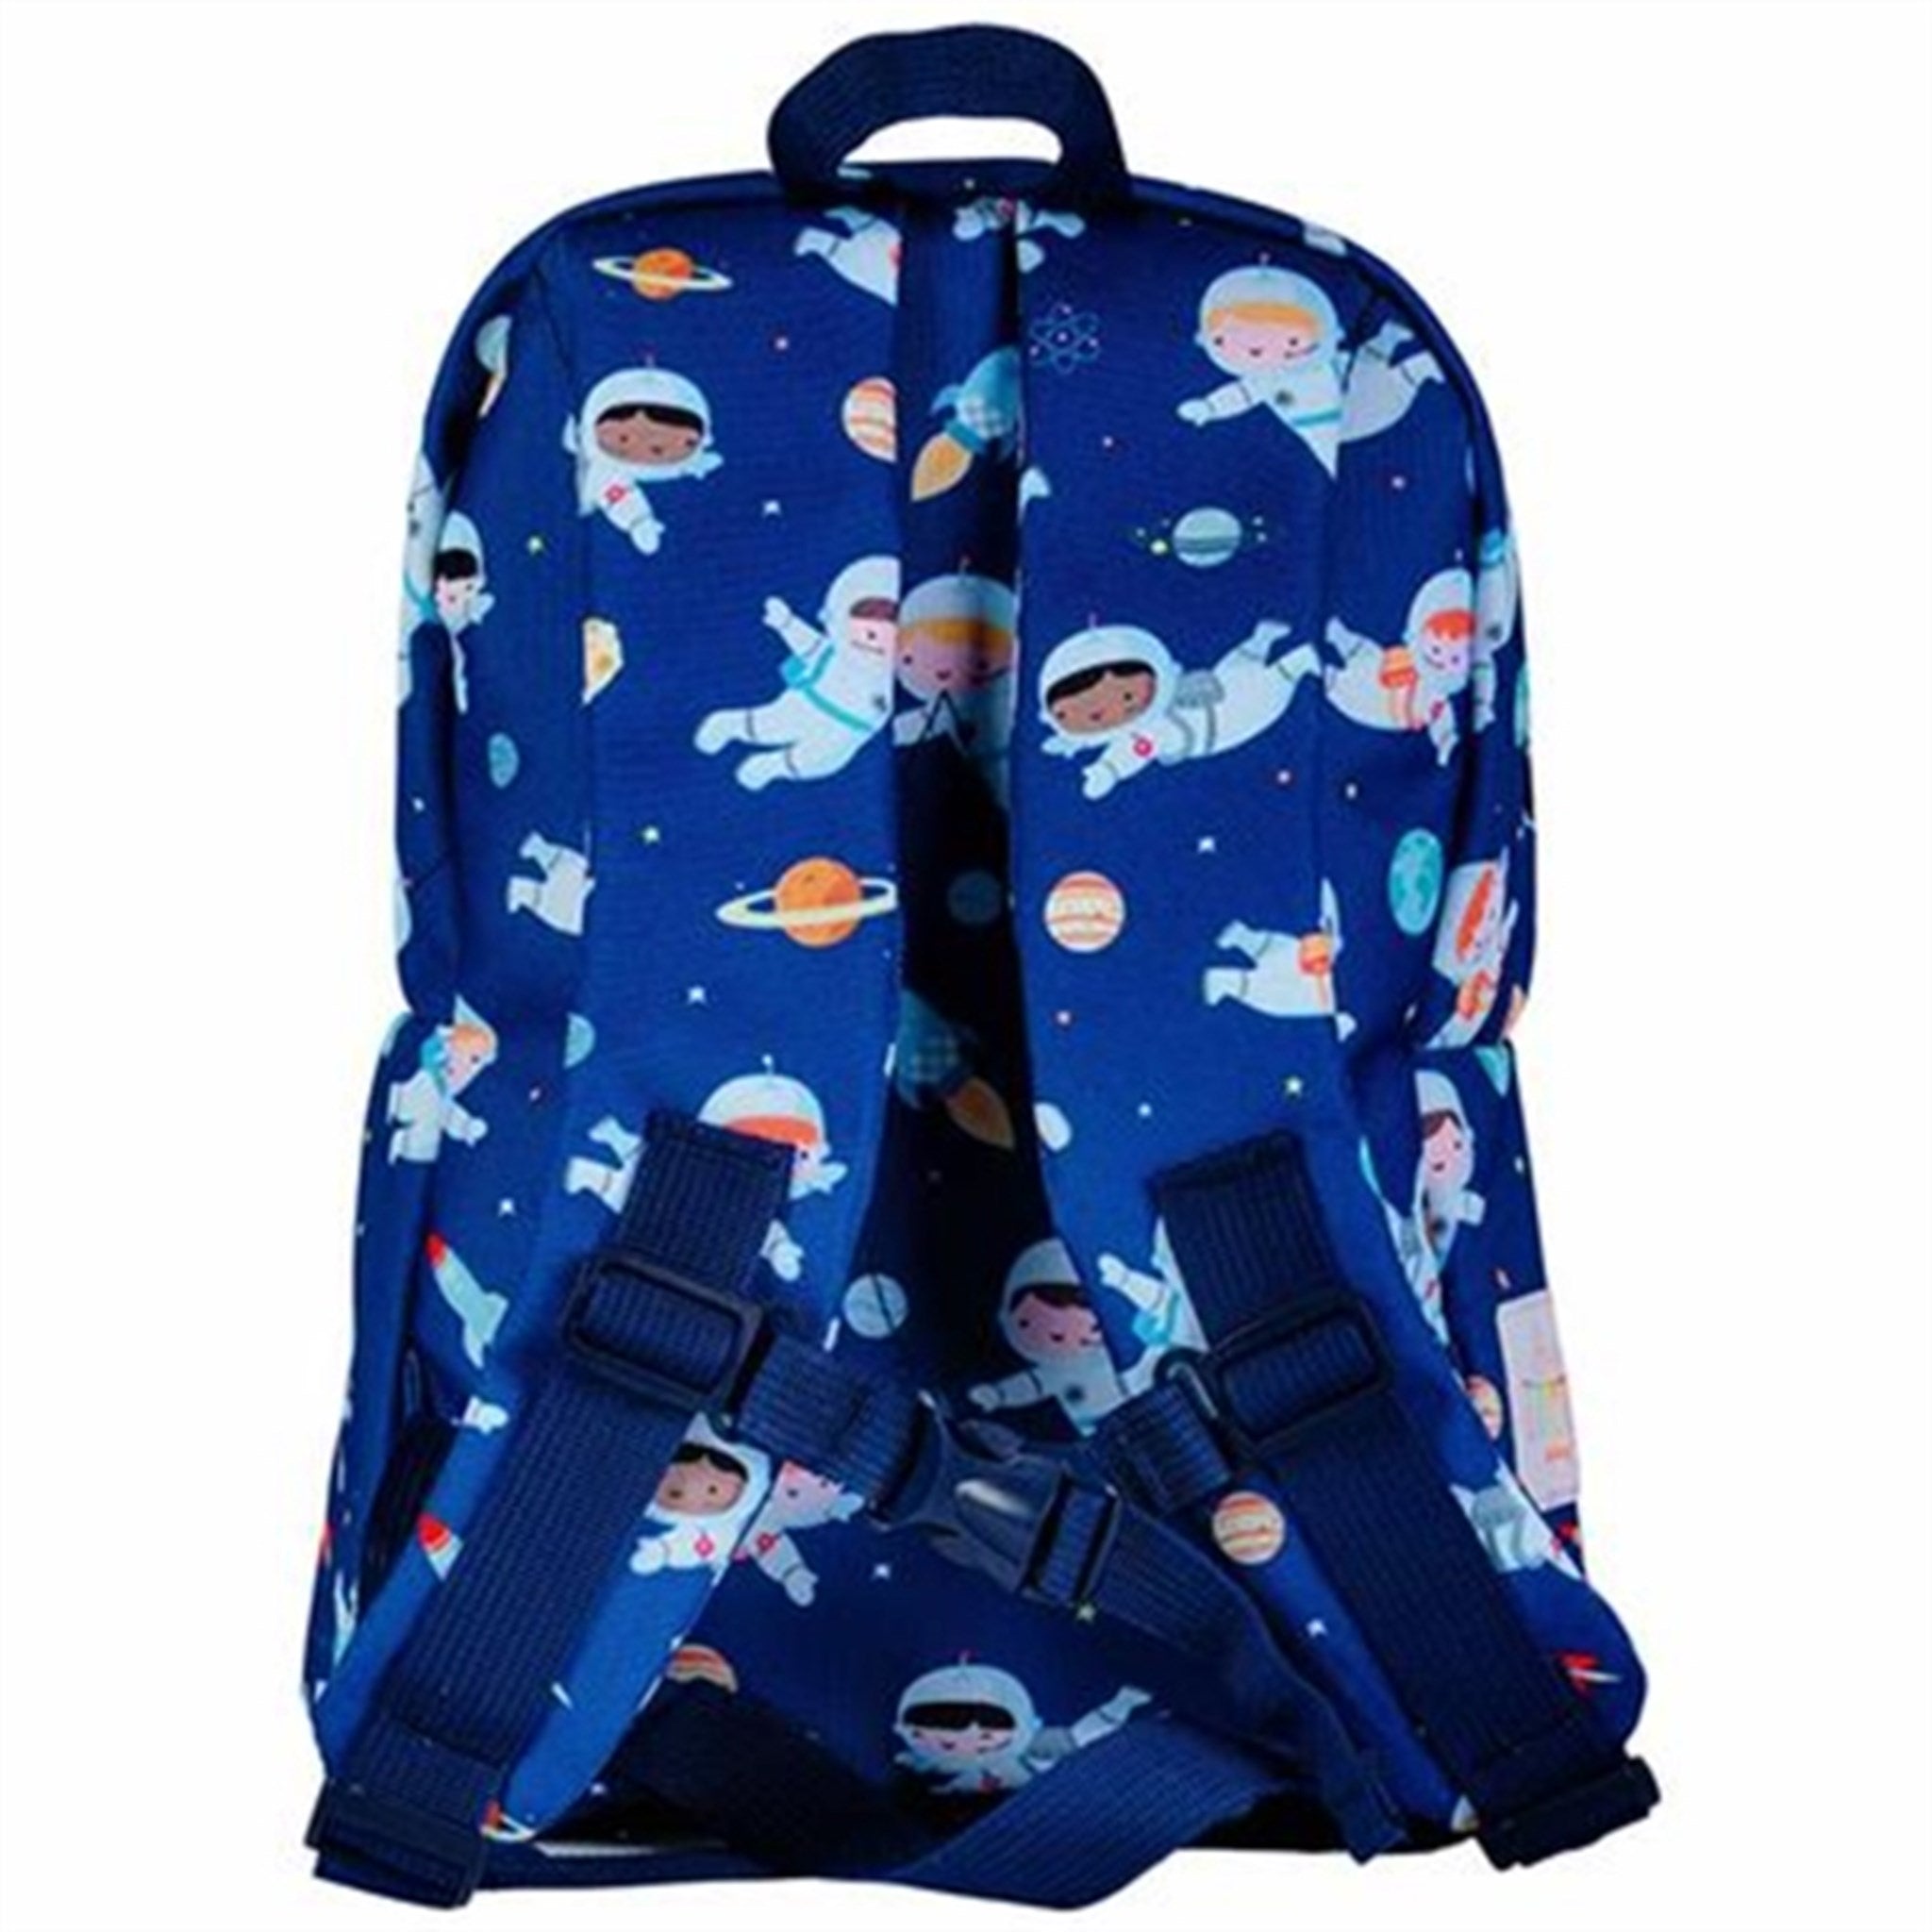 A Little Lovely Company Backpack Small Astronauts 7